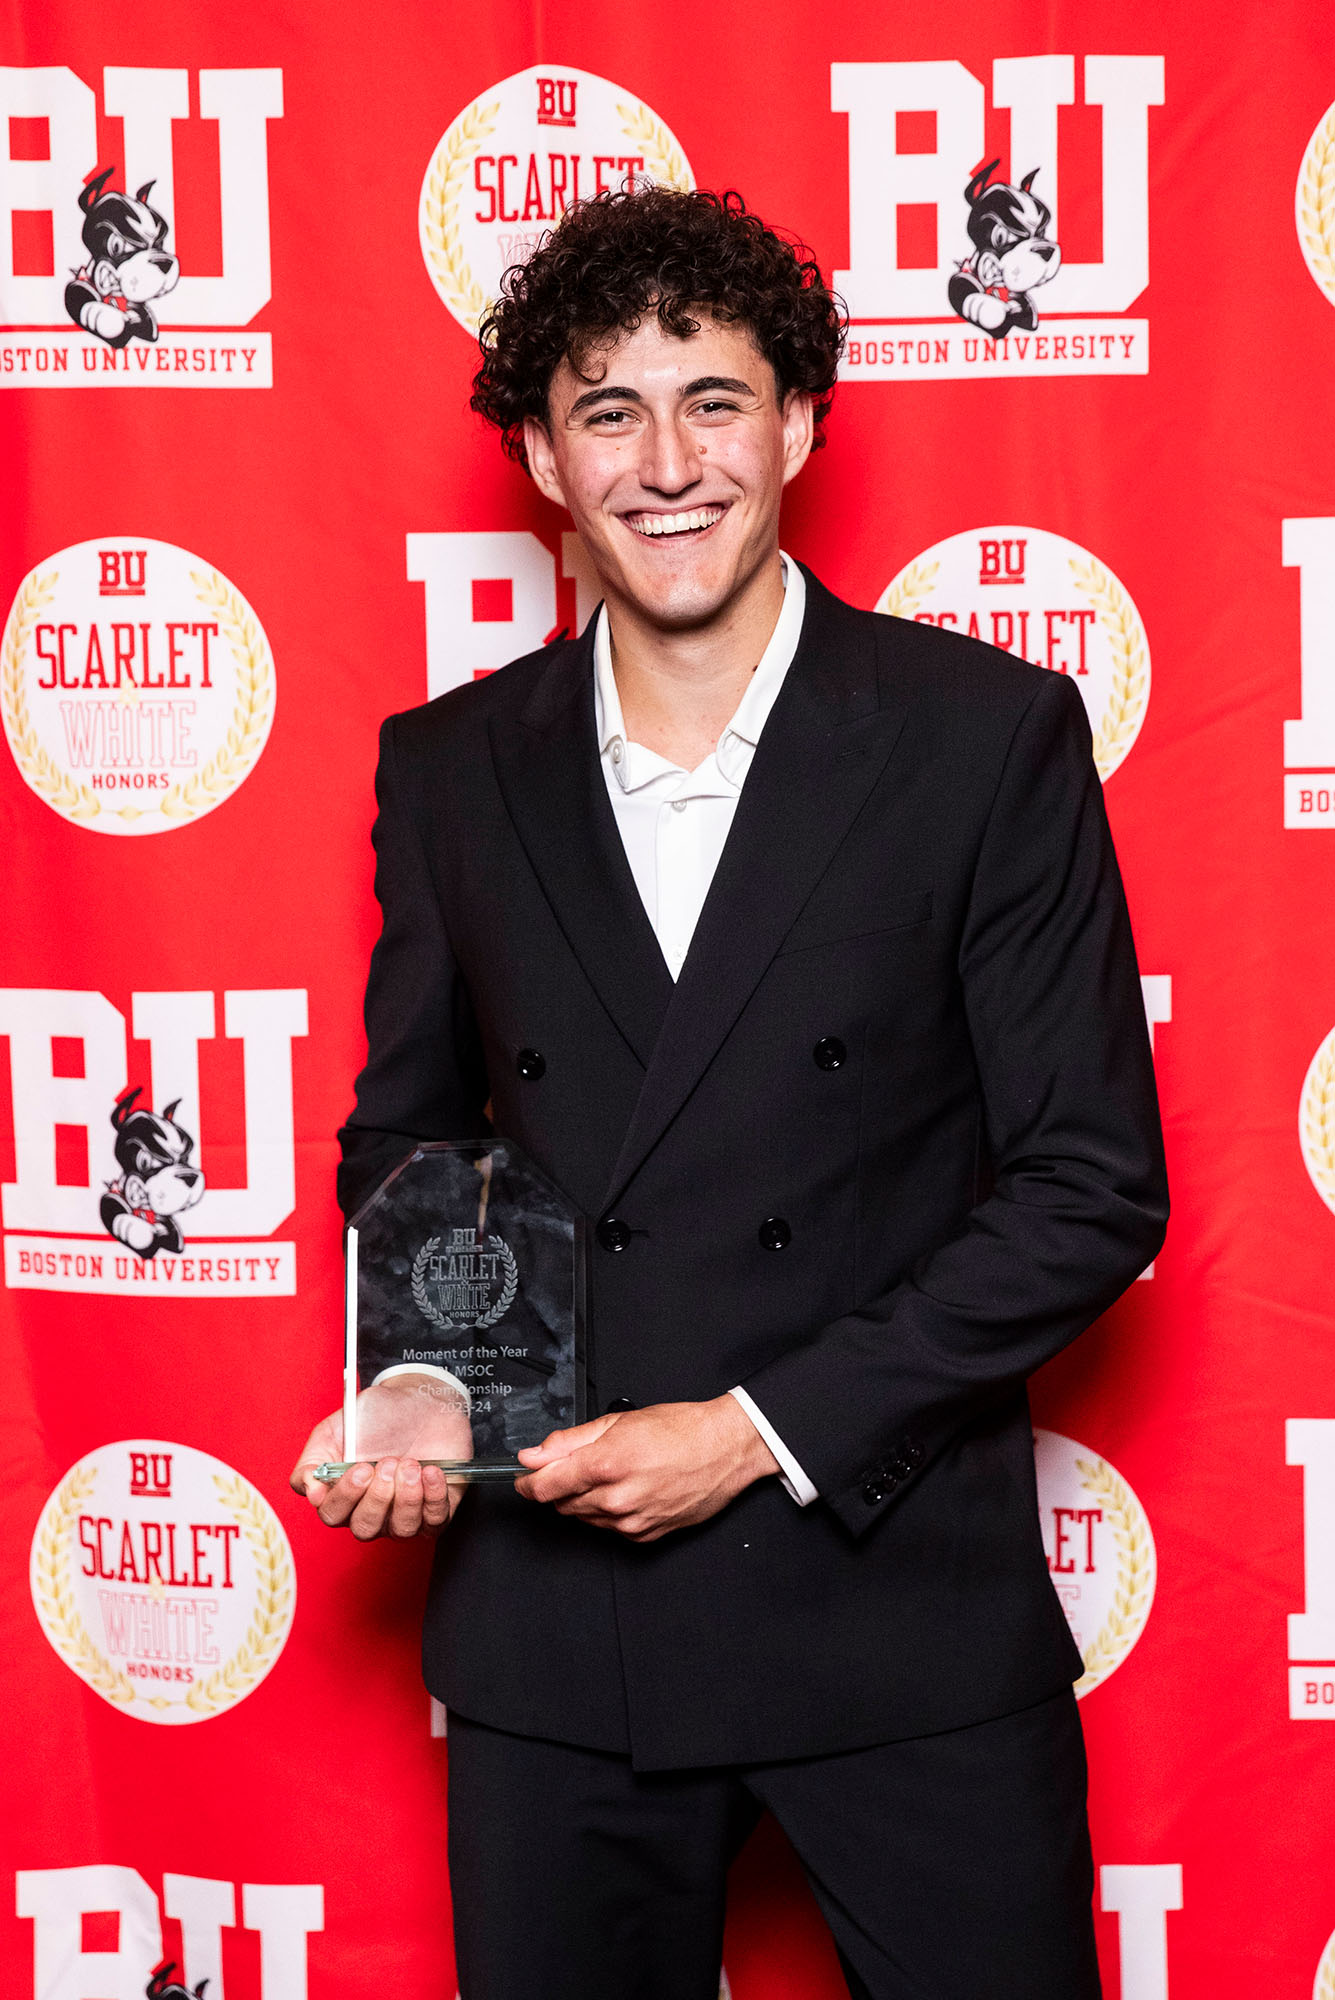 Photo: A picture of a man with curly hair wearing a suit and holding an award. There is a red background behind him that says "BU"